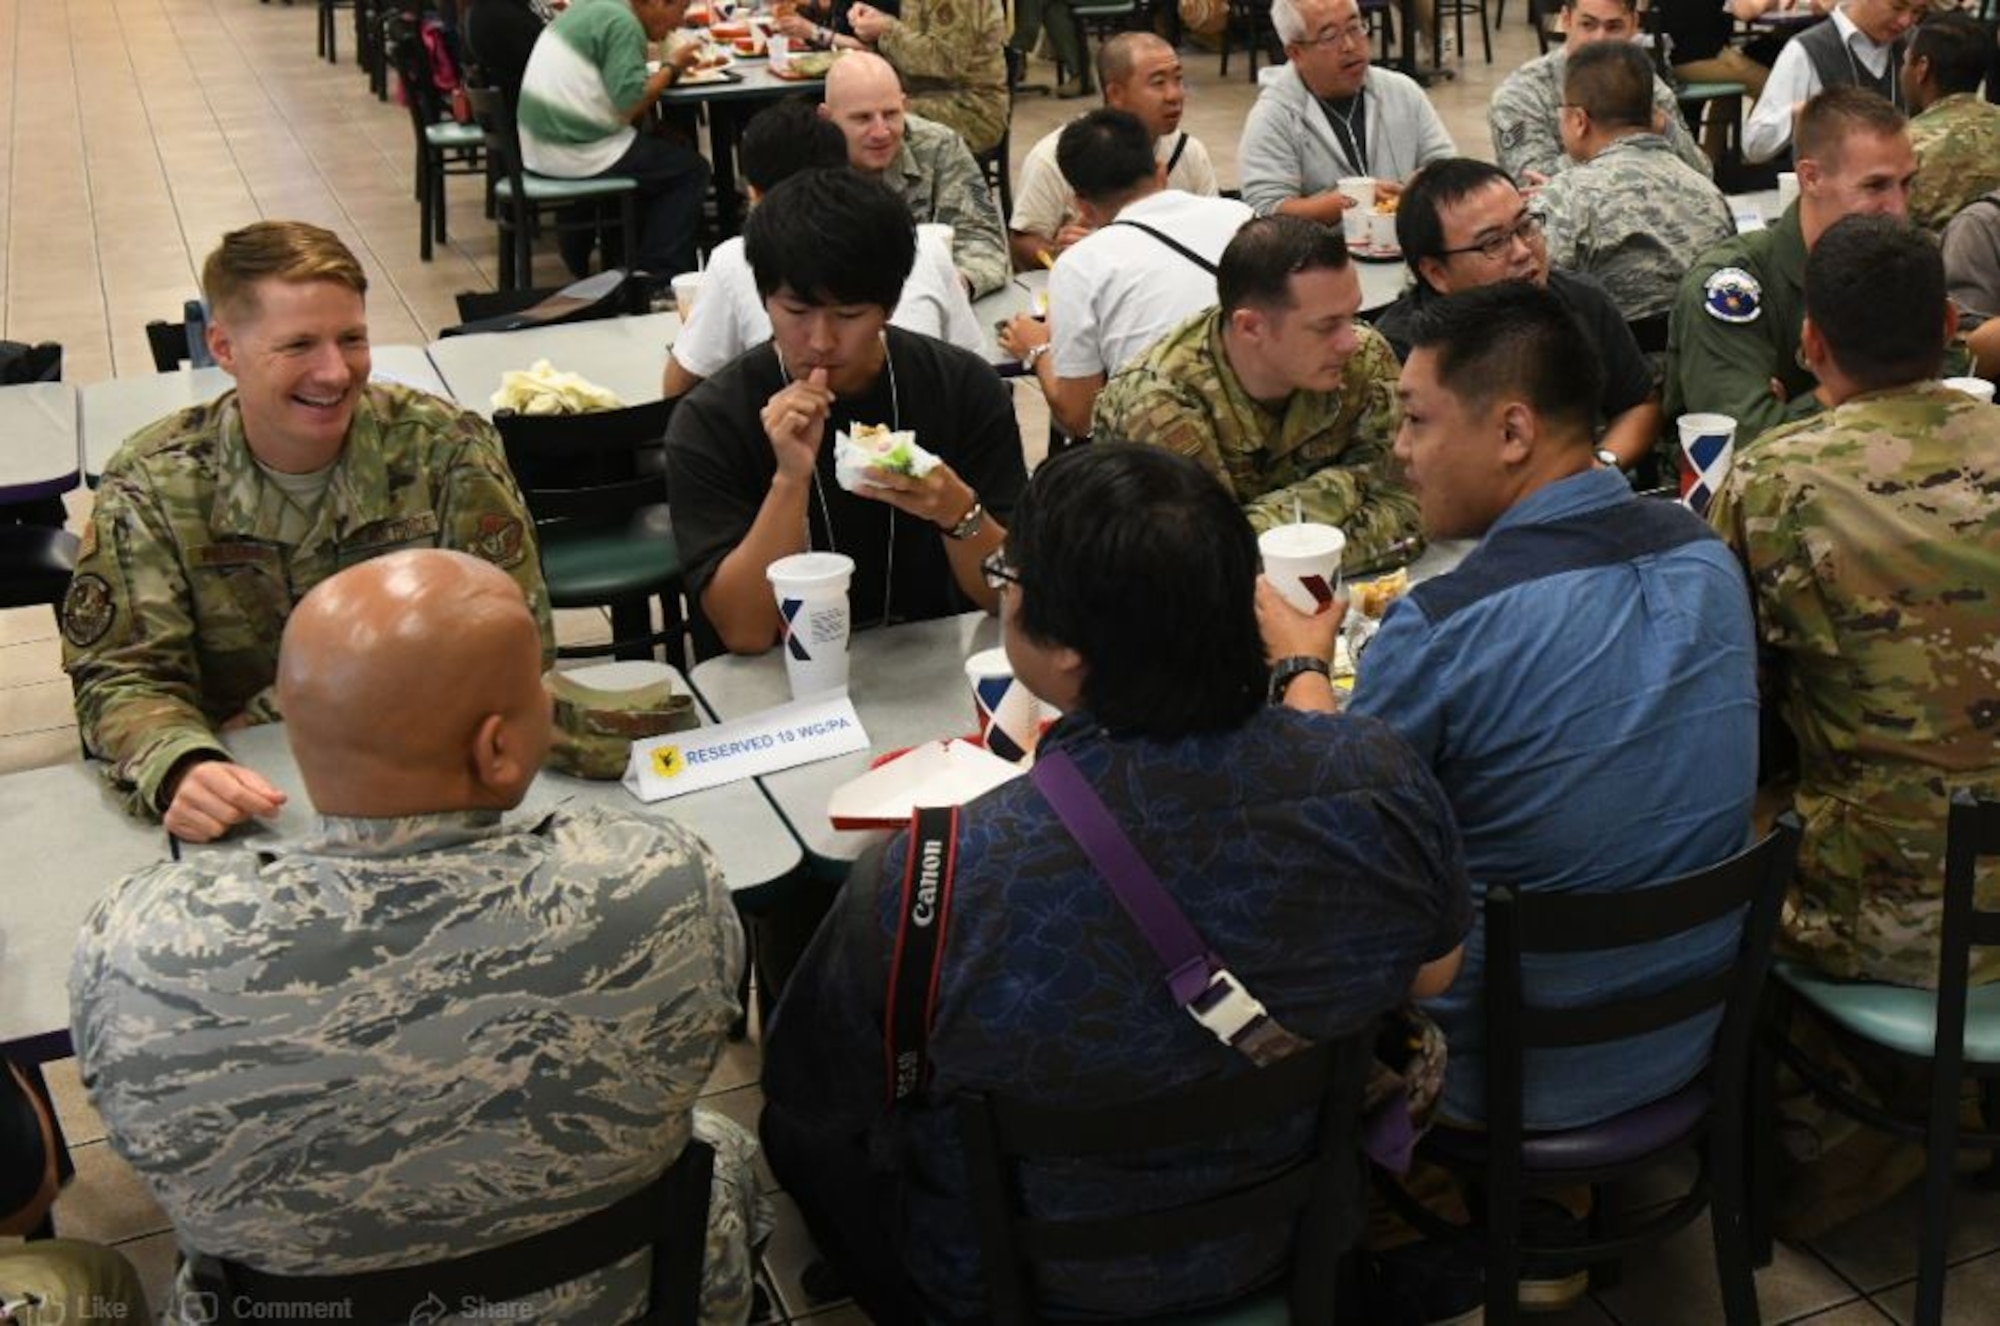 Airmen from the 18th Wing talk and have lunch with Twitter Tour participants at Kadena Air Base, Japan, Nov. 4, 2019. The participants were selected based on when they subscribed to the 18th Wing Twitter page and a brief application process. (U.S. Air Force photo by Staff Sgt. Peter Reft)